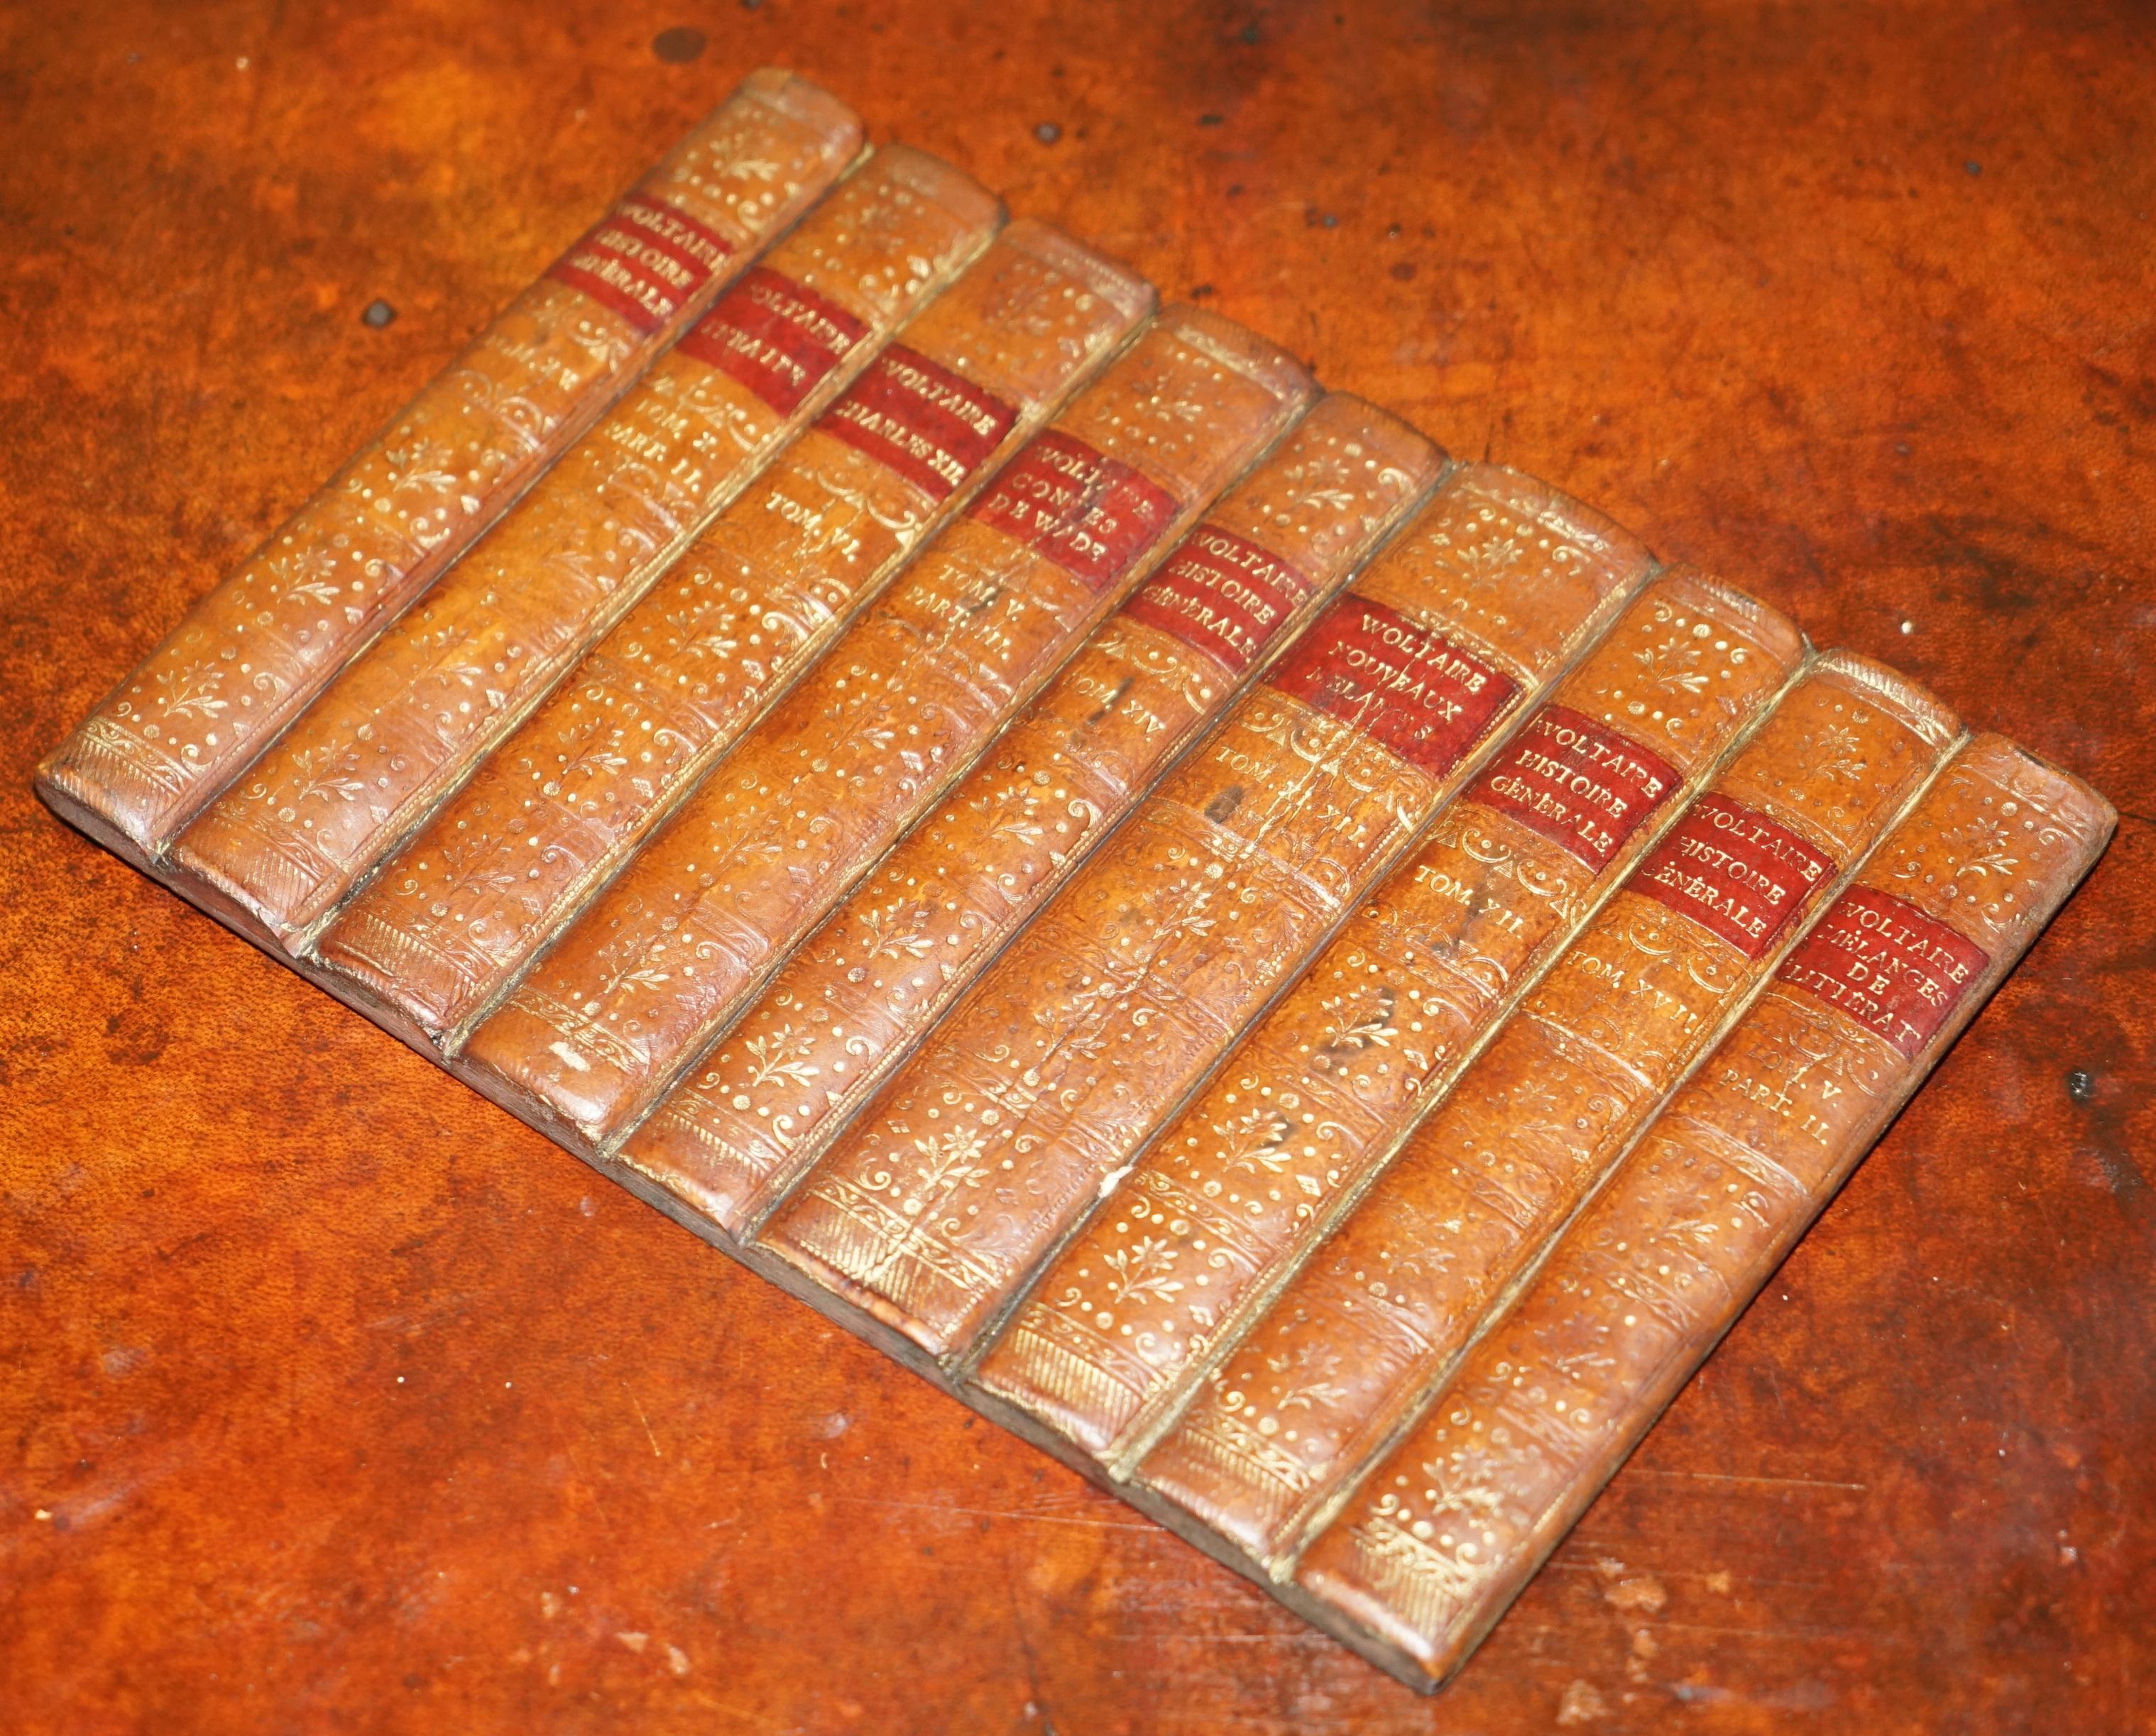 20th Century ViNTAGE ASSORTMENT OF FAUX BOOK FRONTS FOR BOOKCASES, HIDDEN DOORS AND DISPLAY